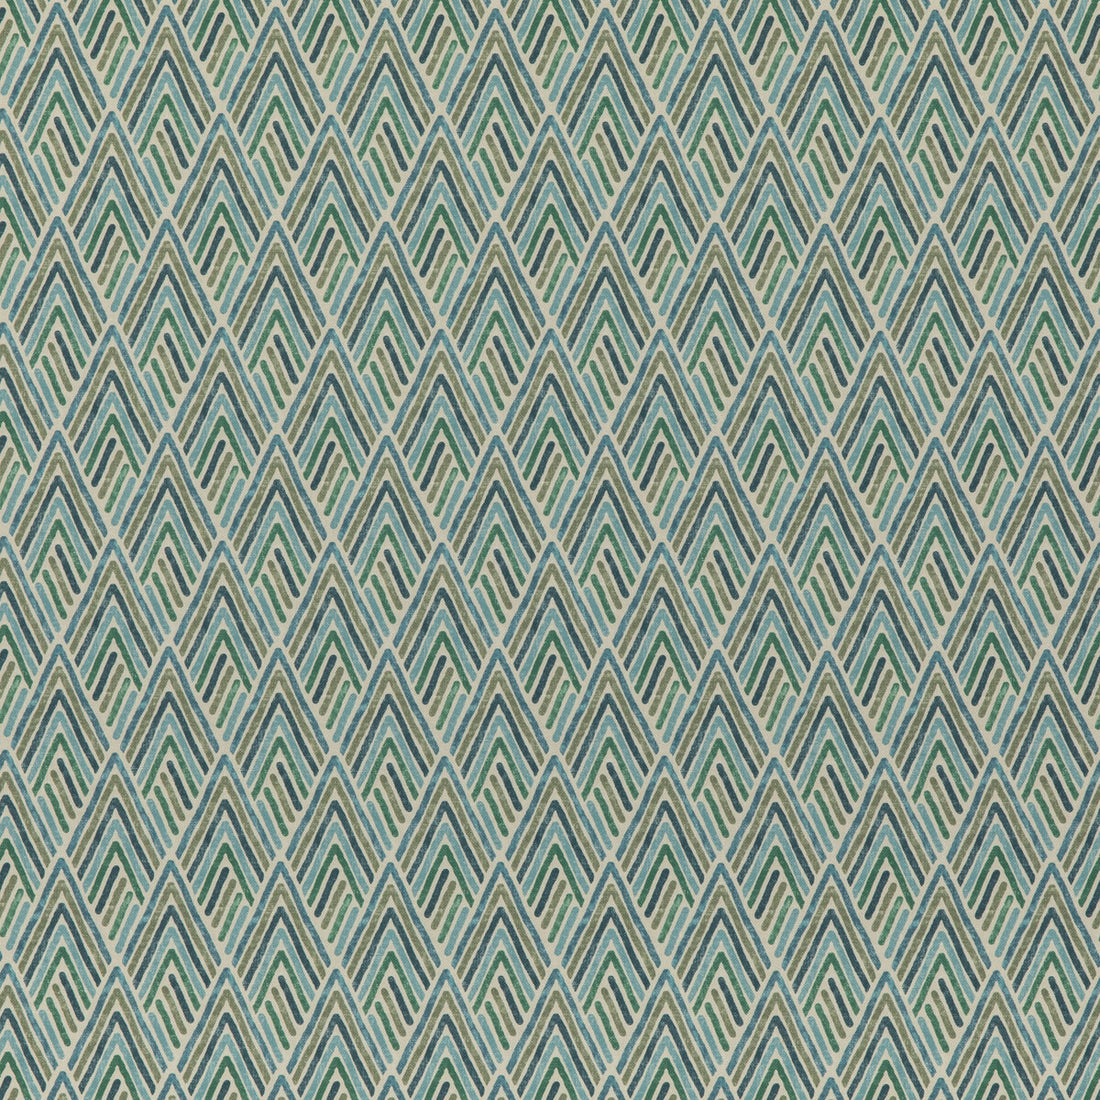 Vista fabric in teal color - pattern ED75041.1.0 - by Threads in the Nala Prints collection